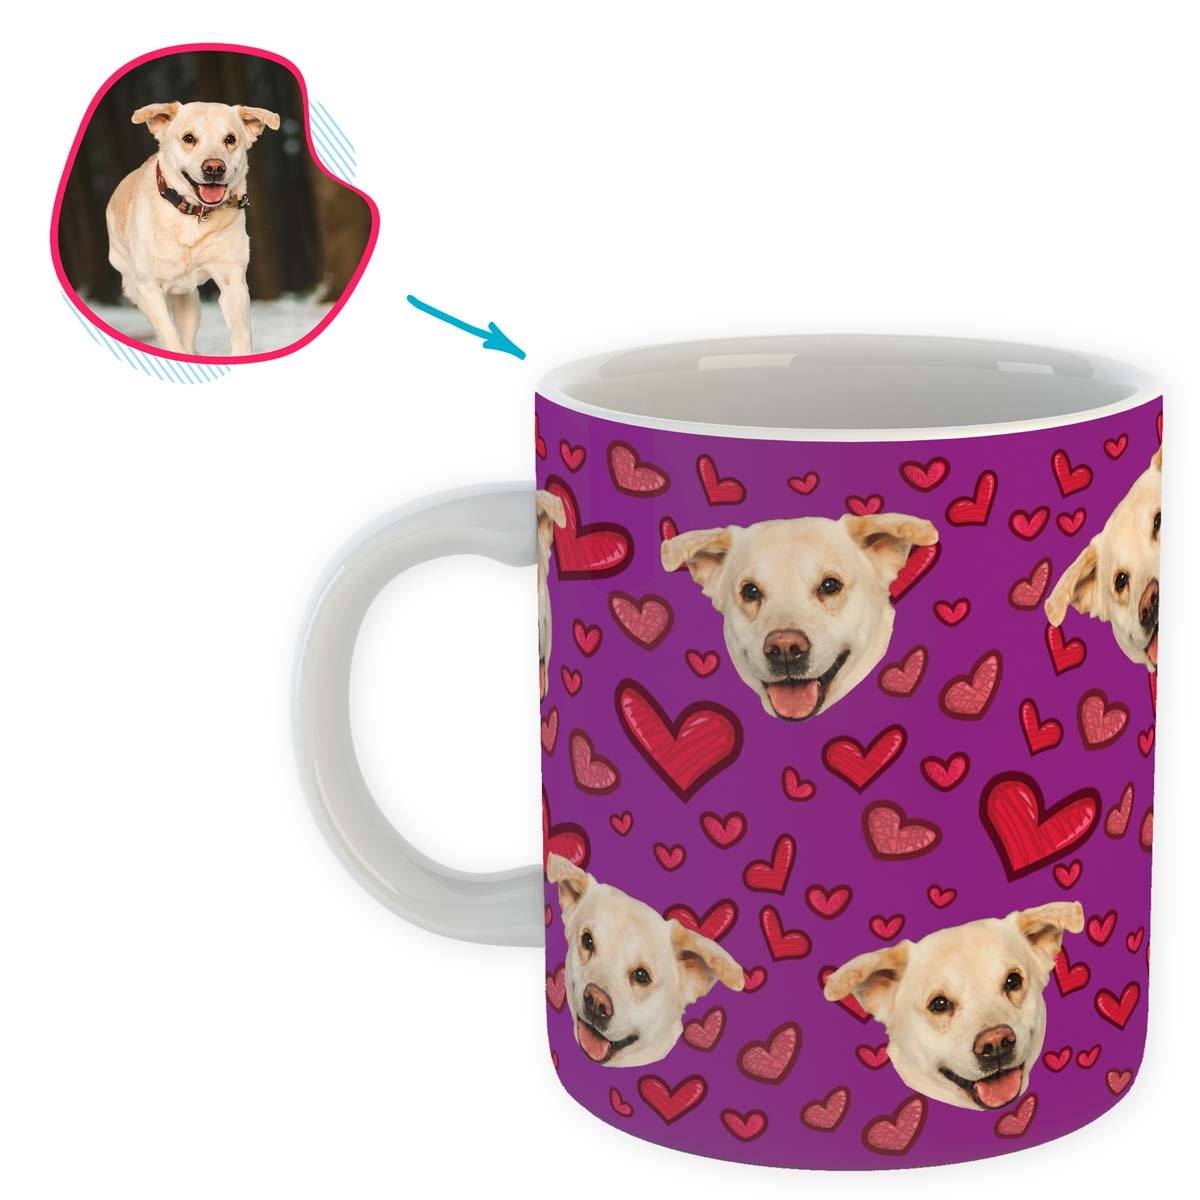 purple Heart mug personalized with photo of face printed on it